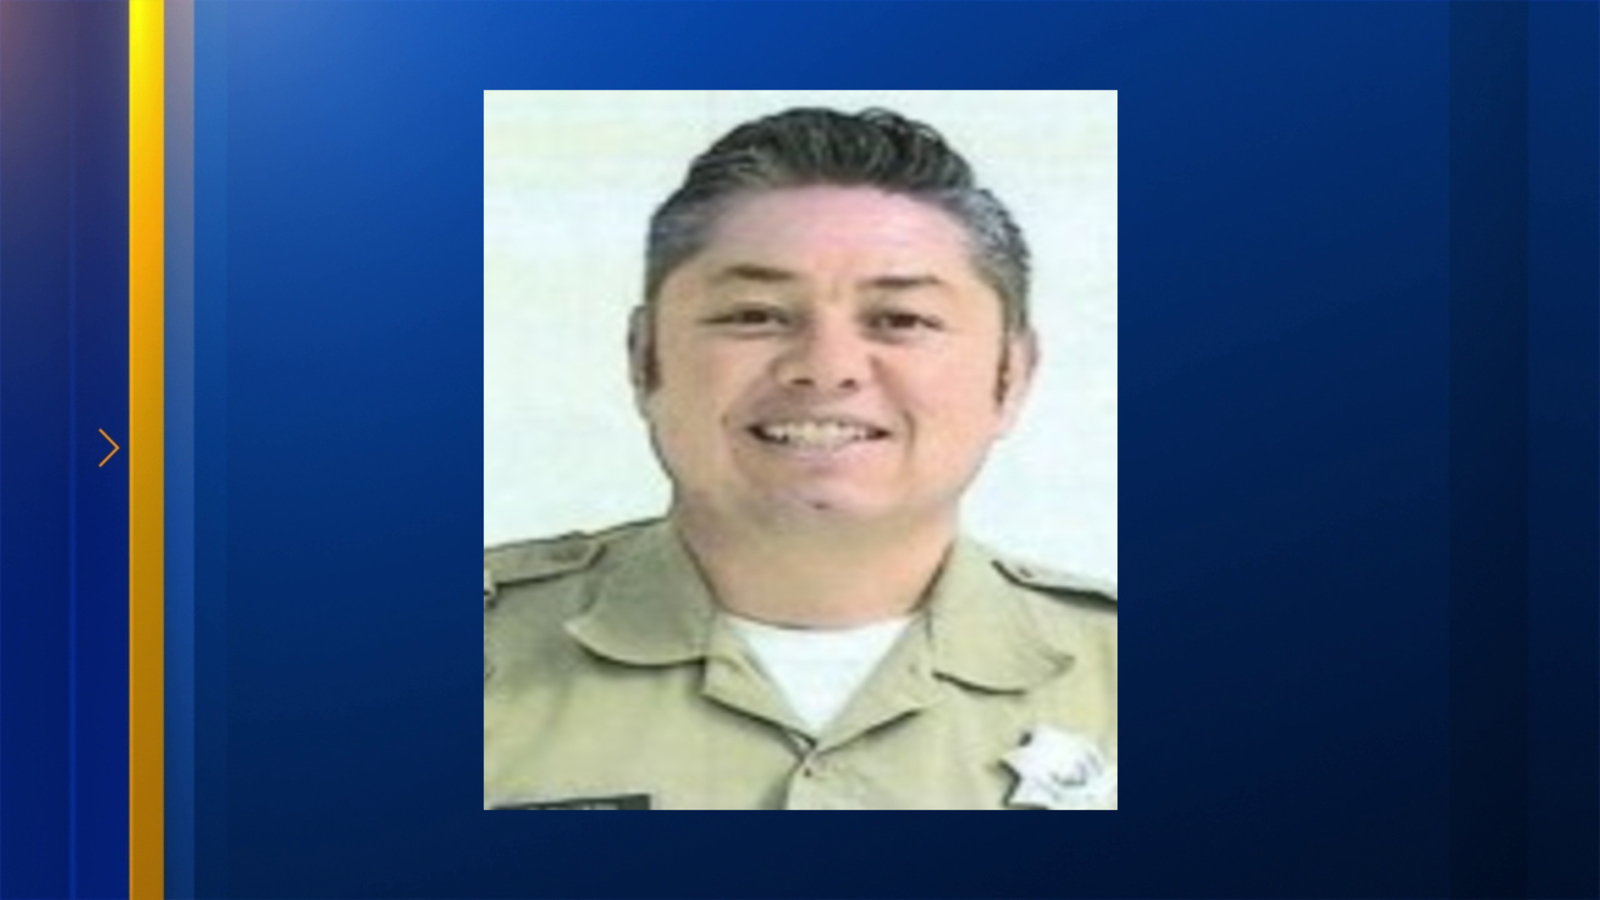 Valley correctional officer killed in crash involving train, officials say [Video]